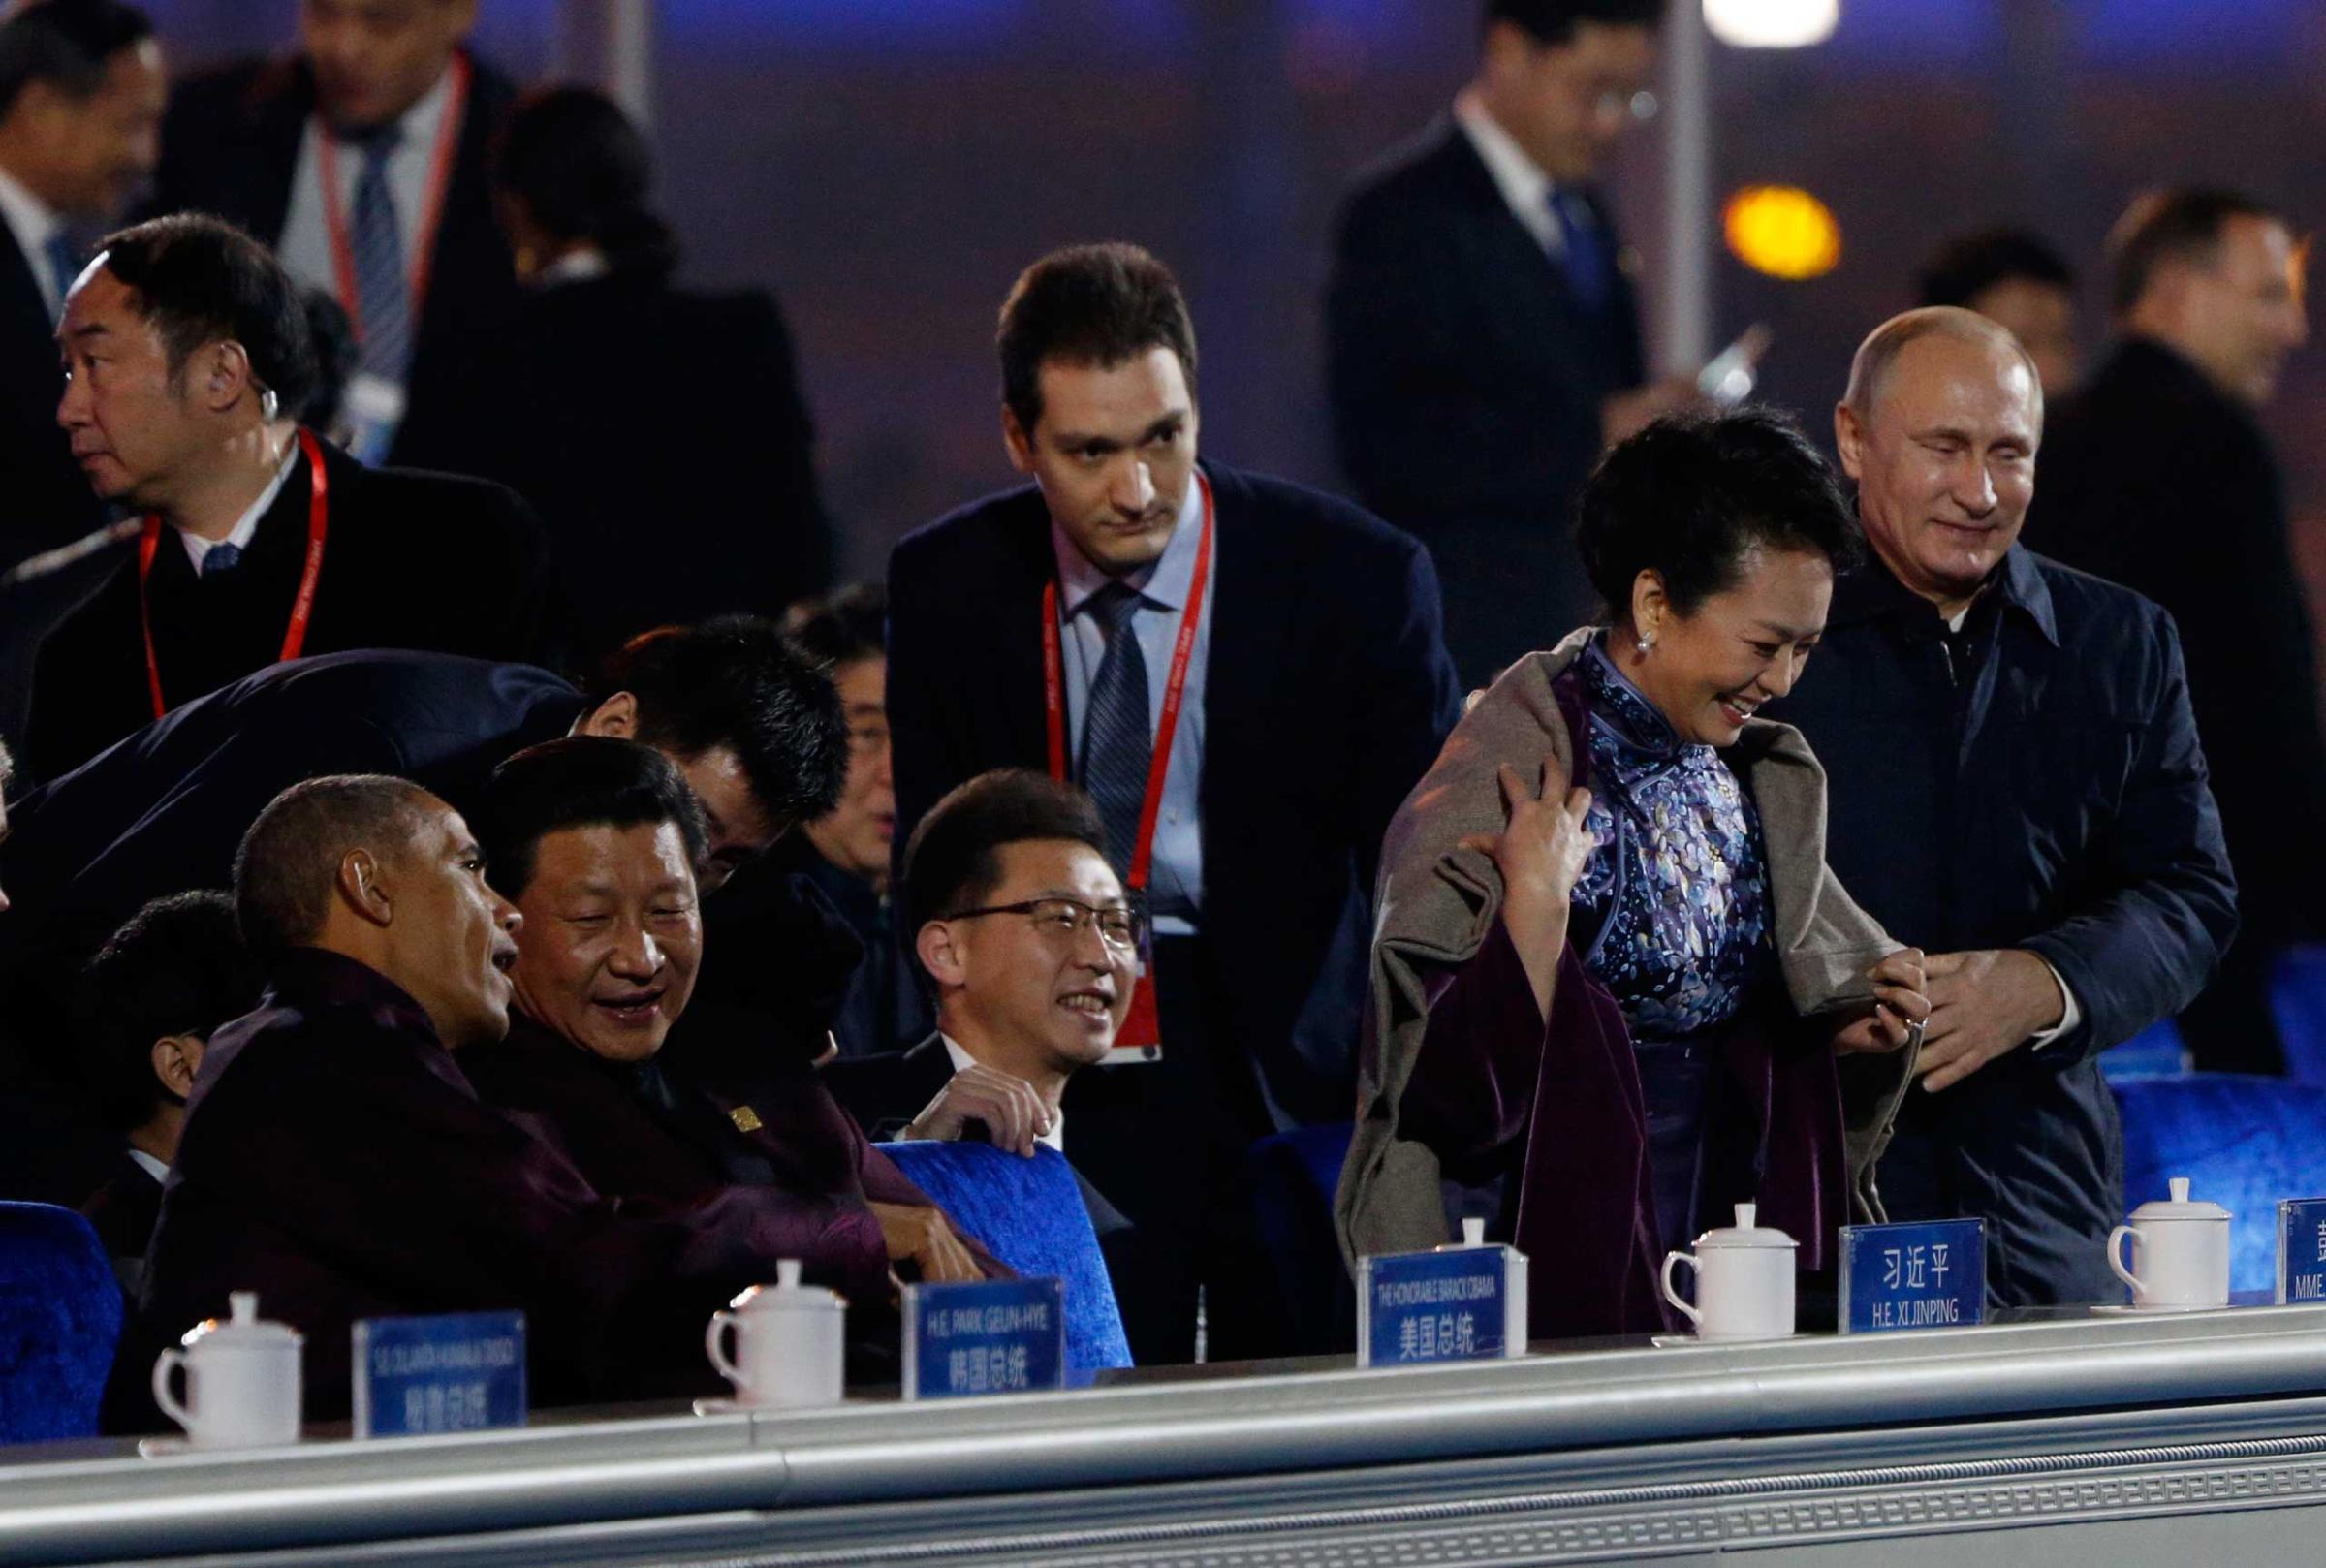 Russia's President Putin helps put a blanket on Peng, wife of China's President Xi, as Xi talks to U.S. President Obama during a lights and fireworks show to celebrate APEC Leaders' Meeting, at National Aquatics Center in Beijing